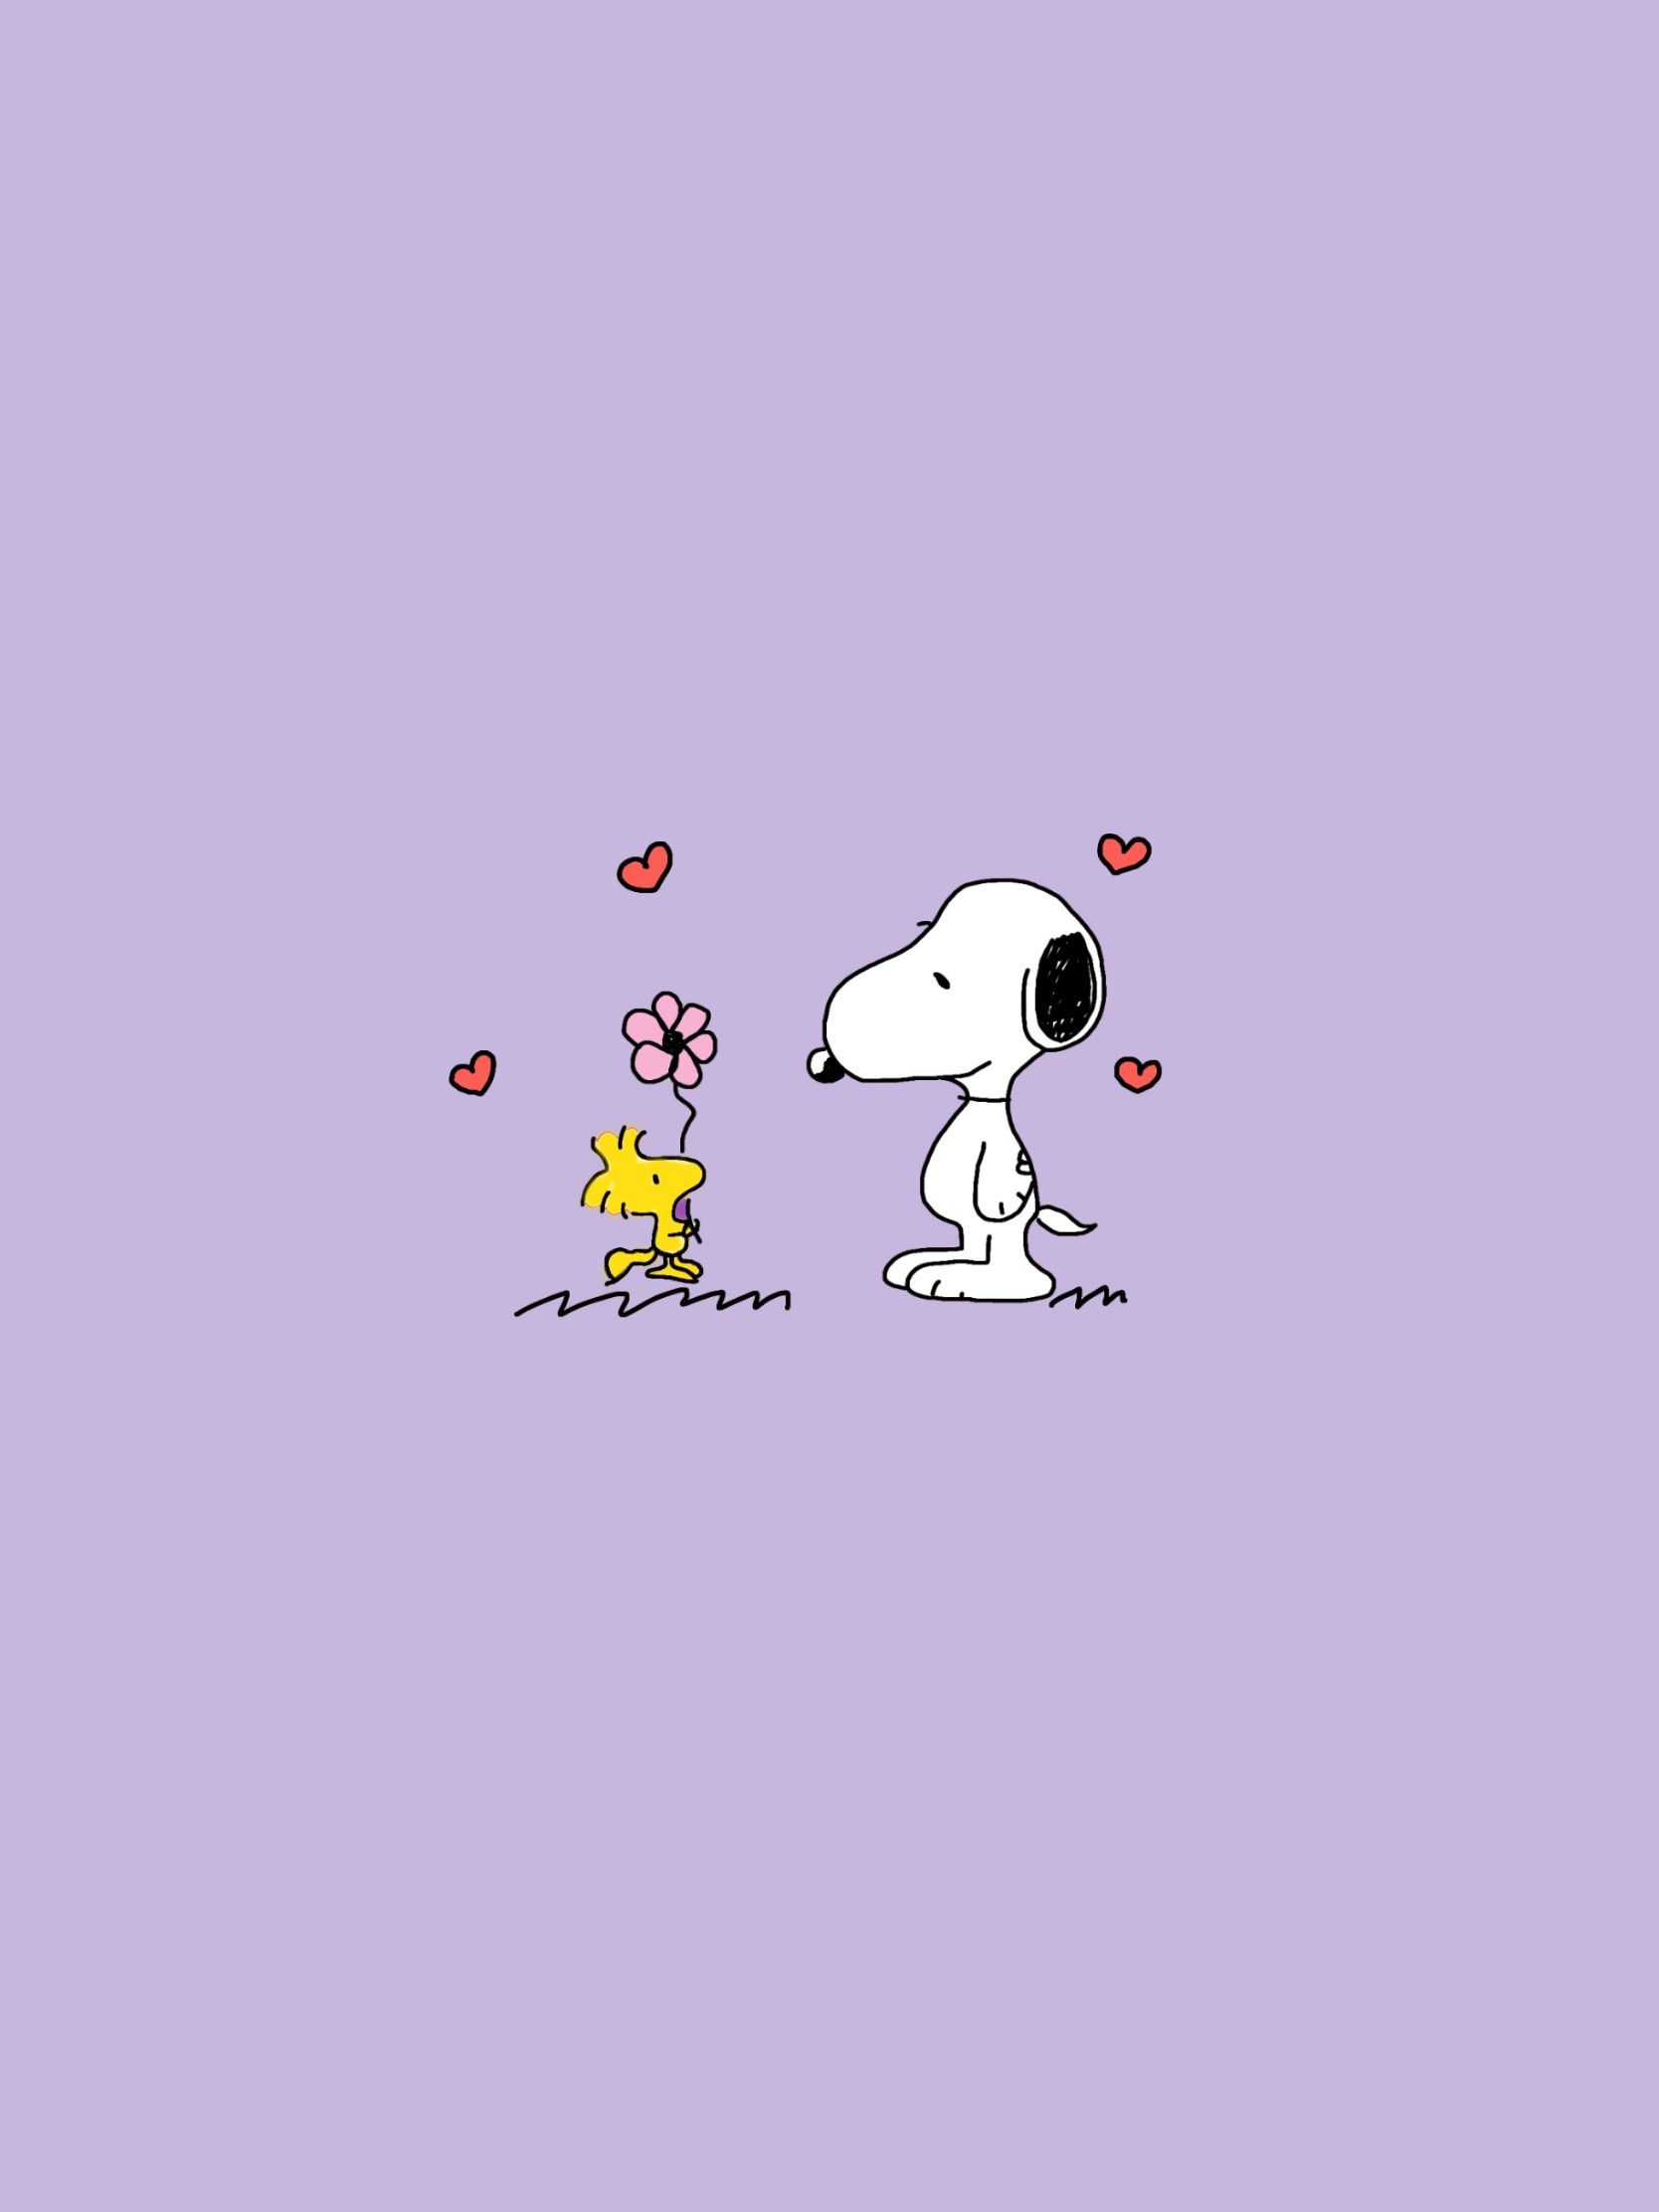 Snoopy and woodstock are standing next to each other - Snoopy